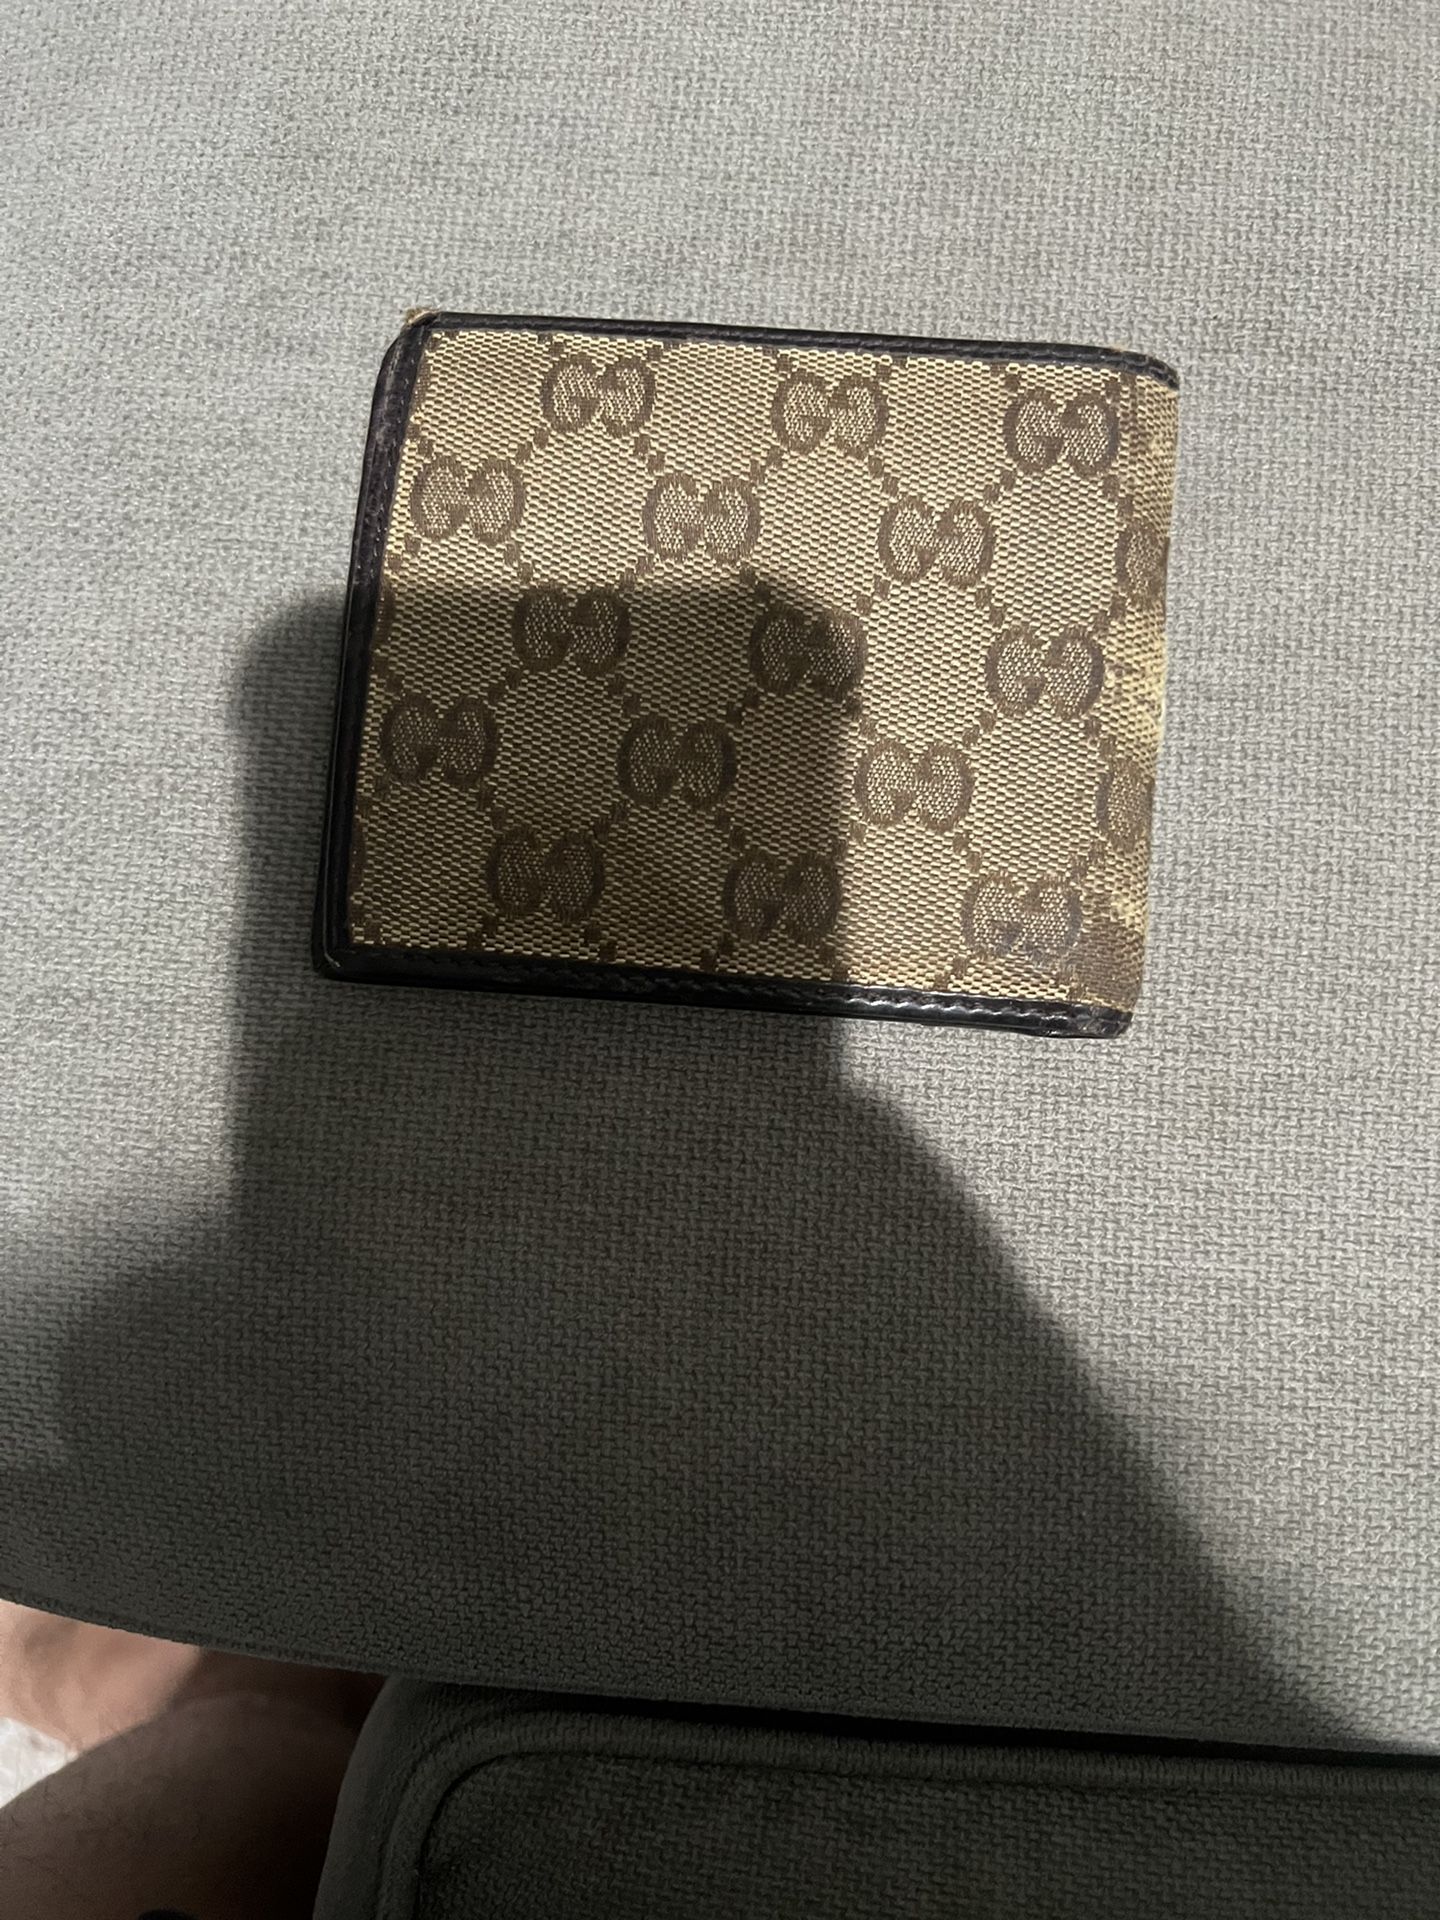 Gucci Men’s Wallet Used